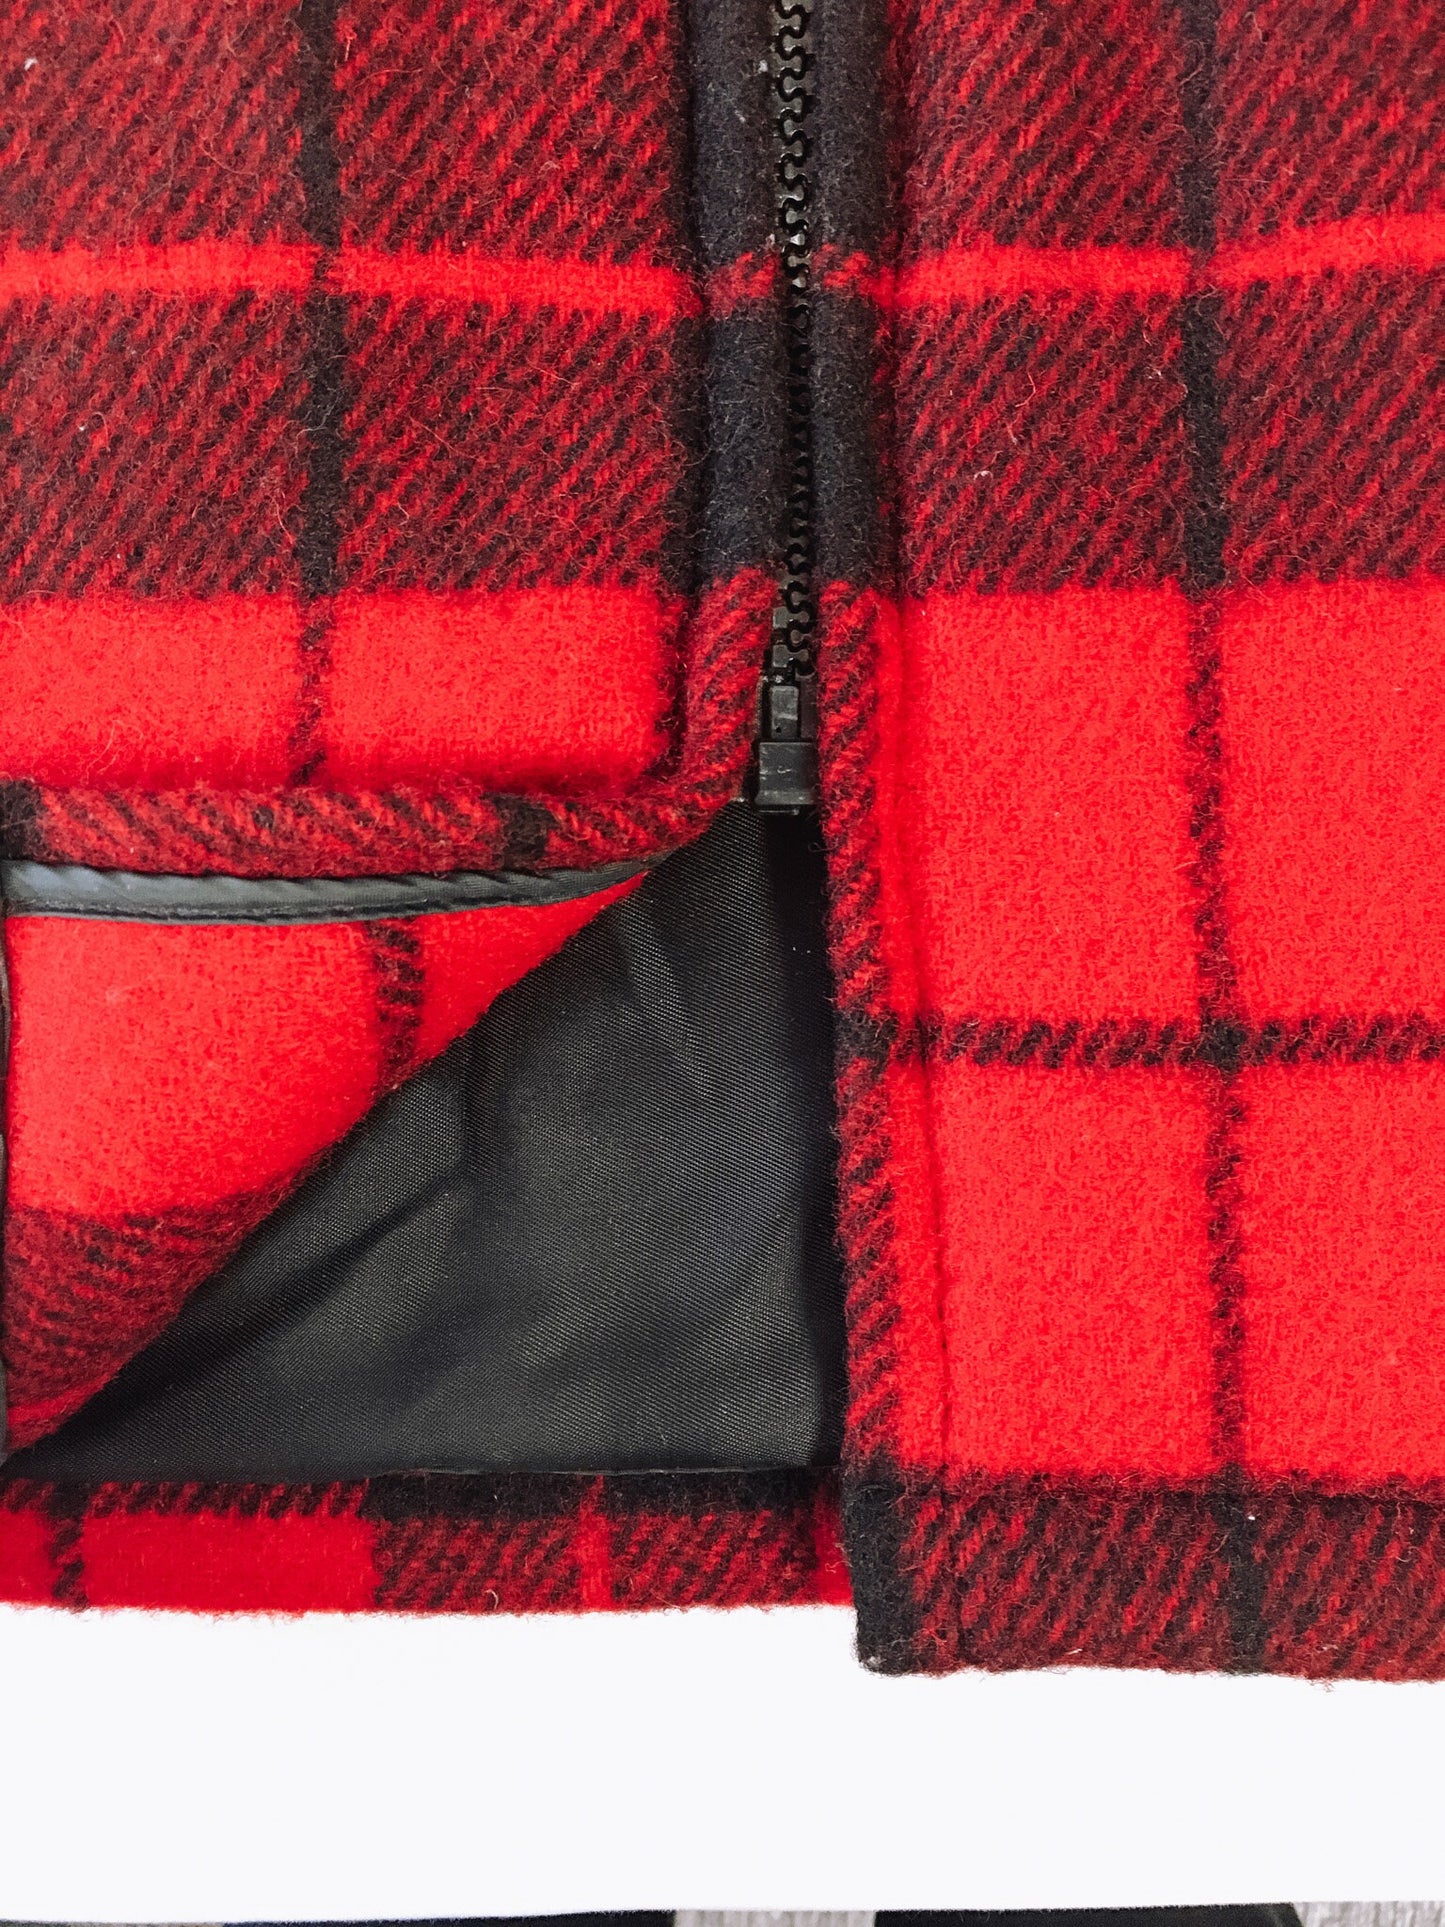 Vintage 70s Woolrich Red Buffalo Plaid Jacket, Sz. M, 1970s Pure Wool Coat